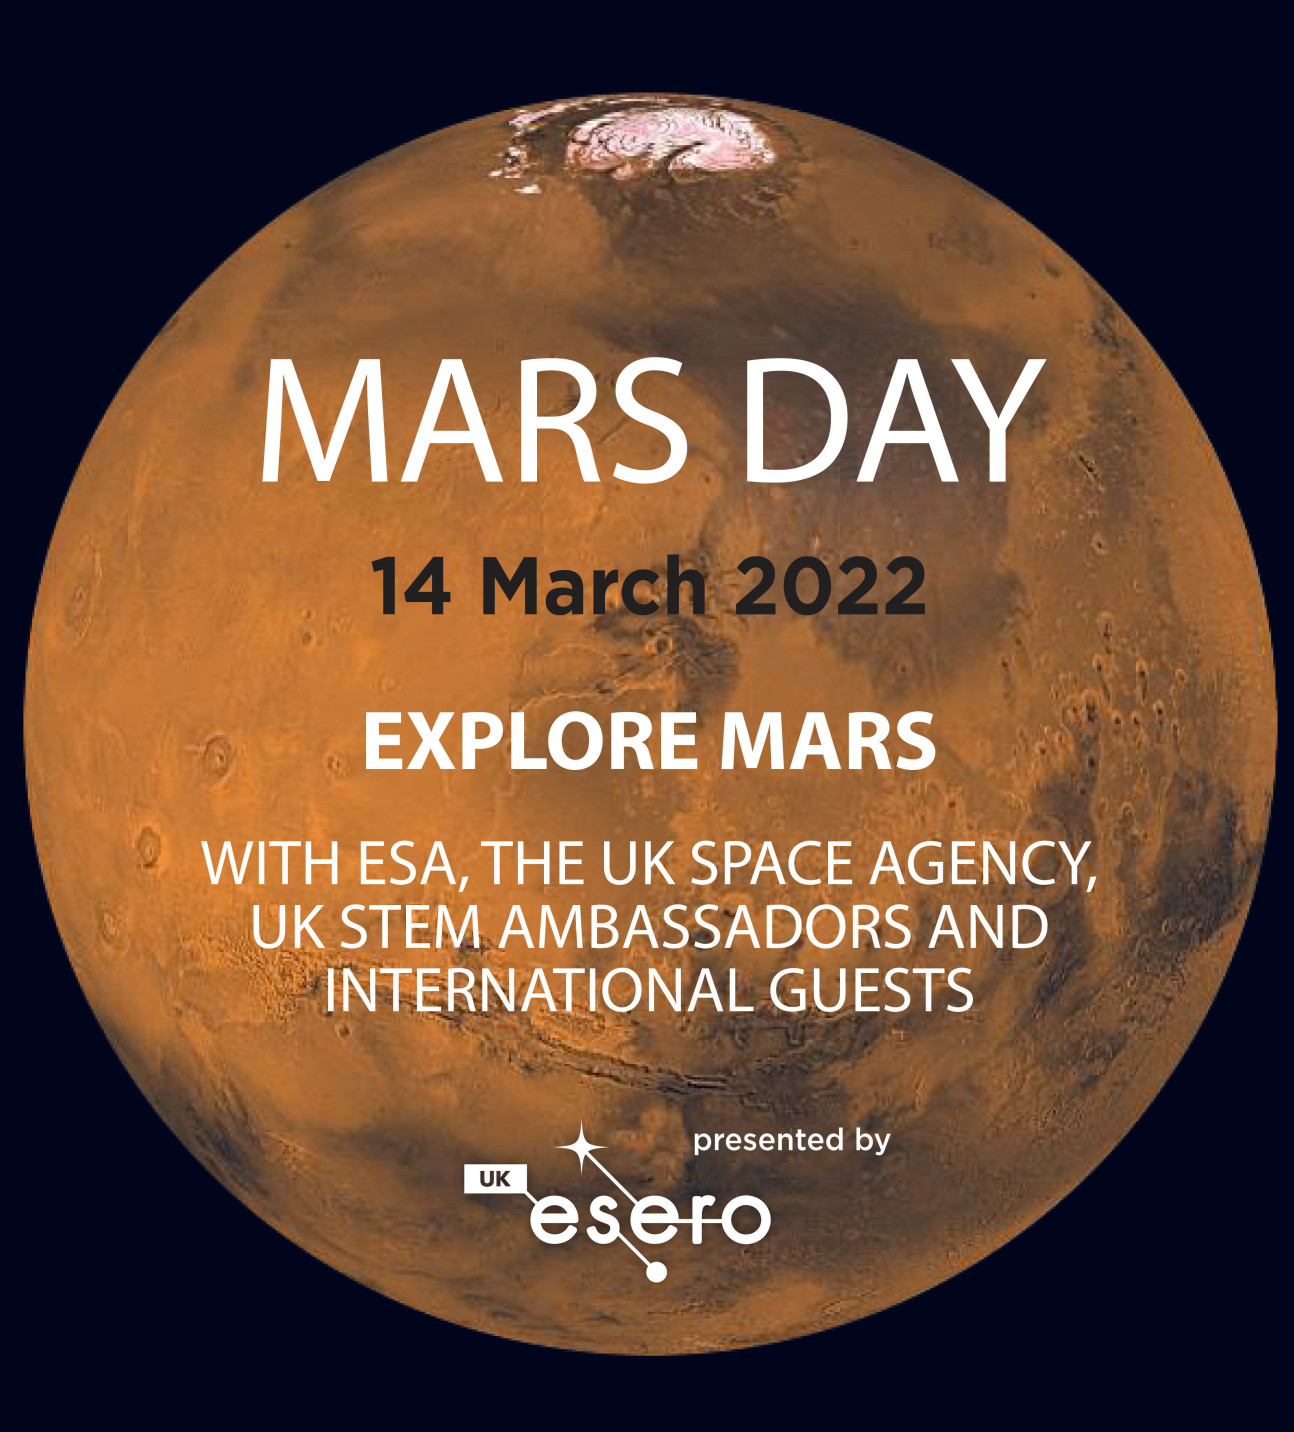 Promotional image for Mars Day 2022